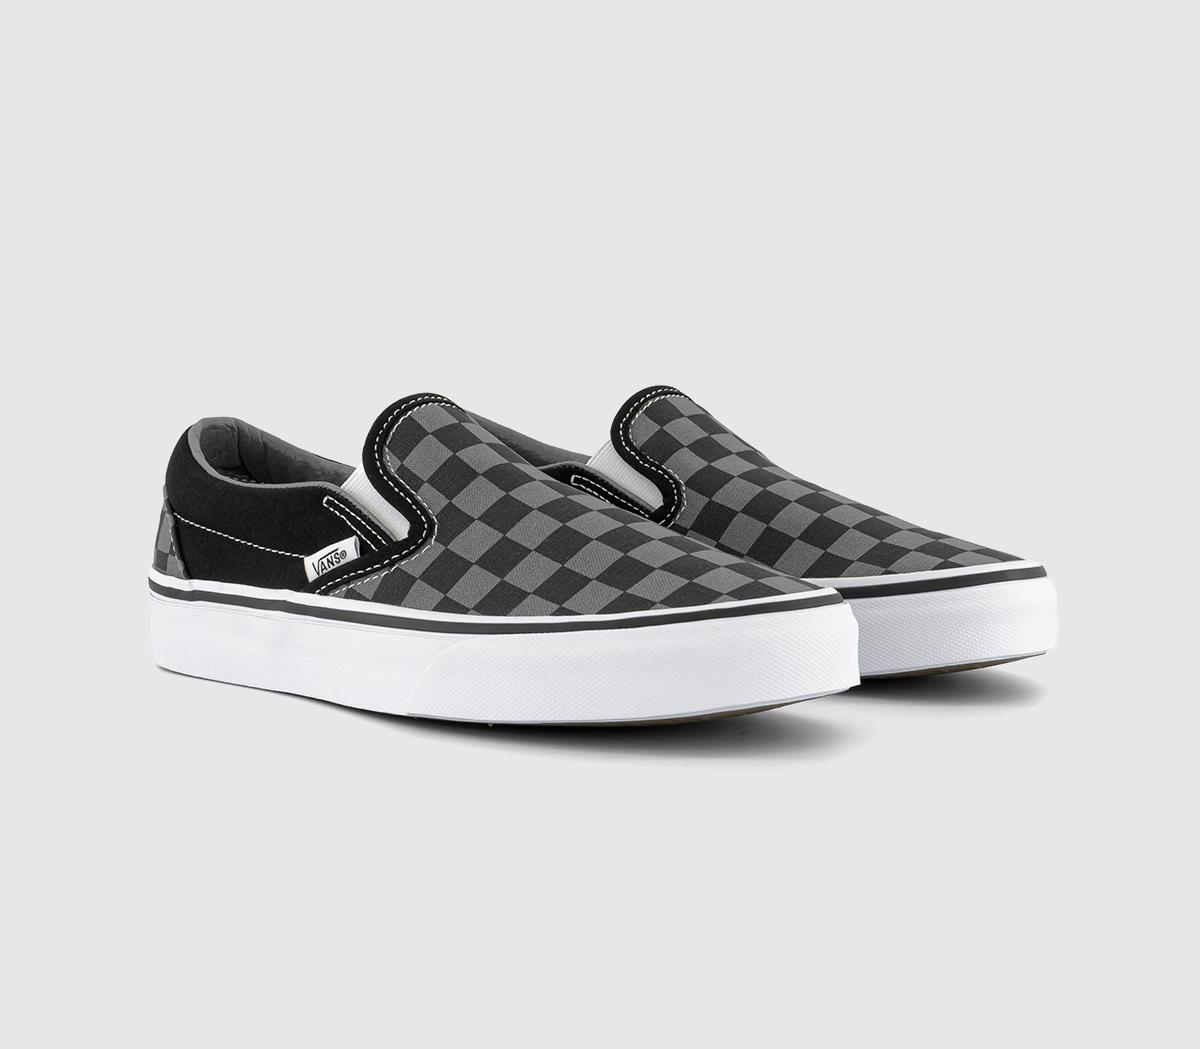 Vans Classic Slip On Trainers Black Pewter Check, 7.5